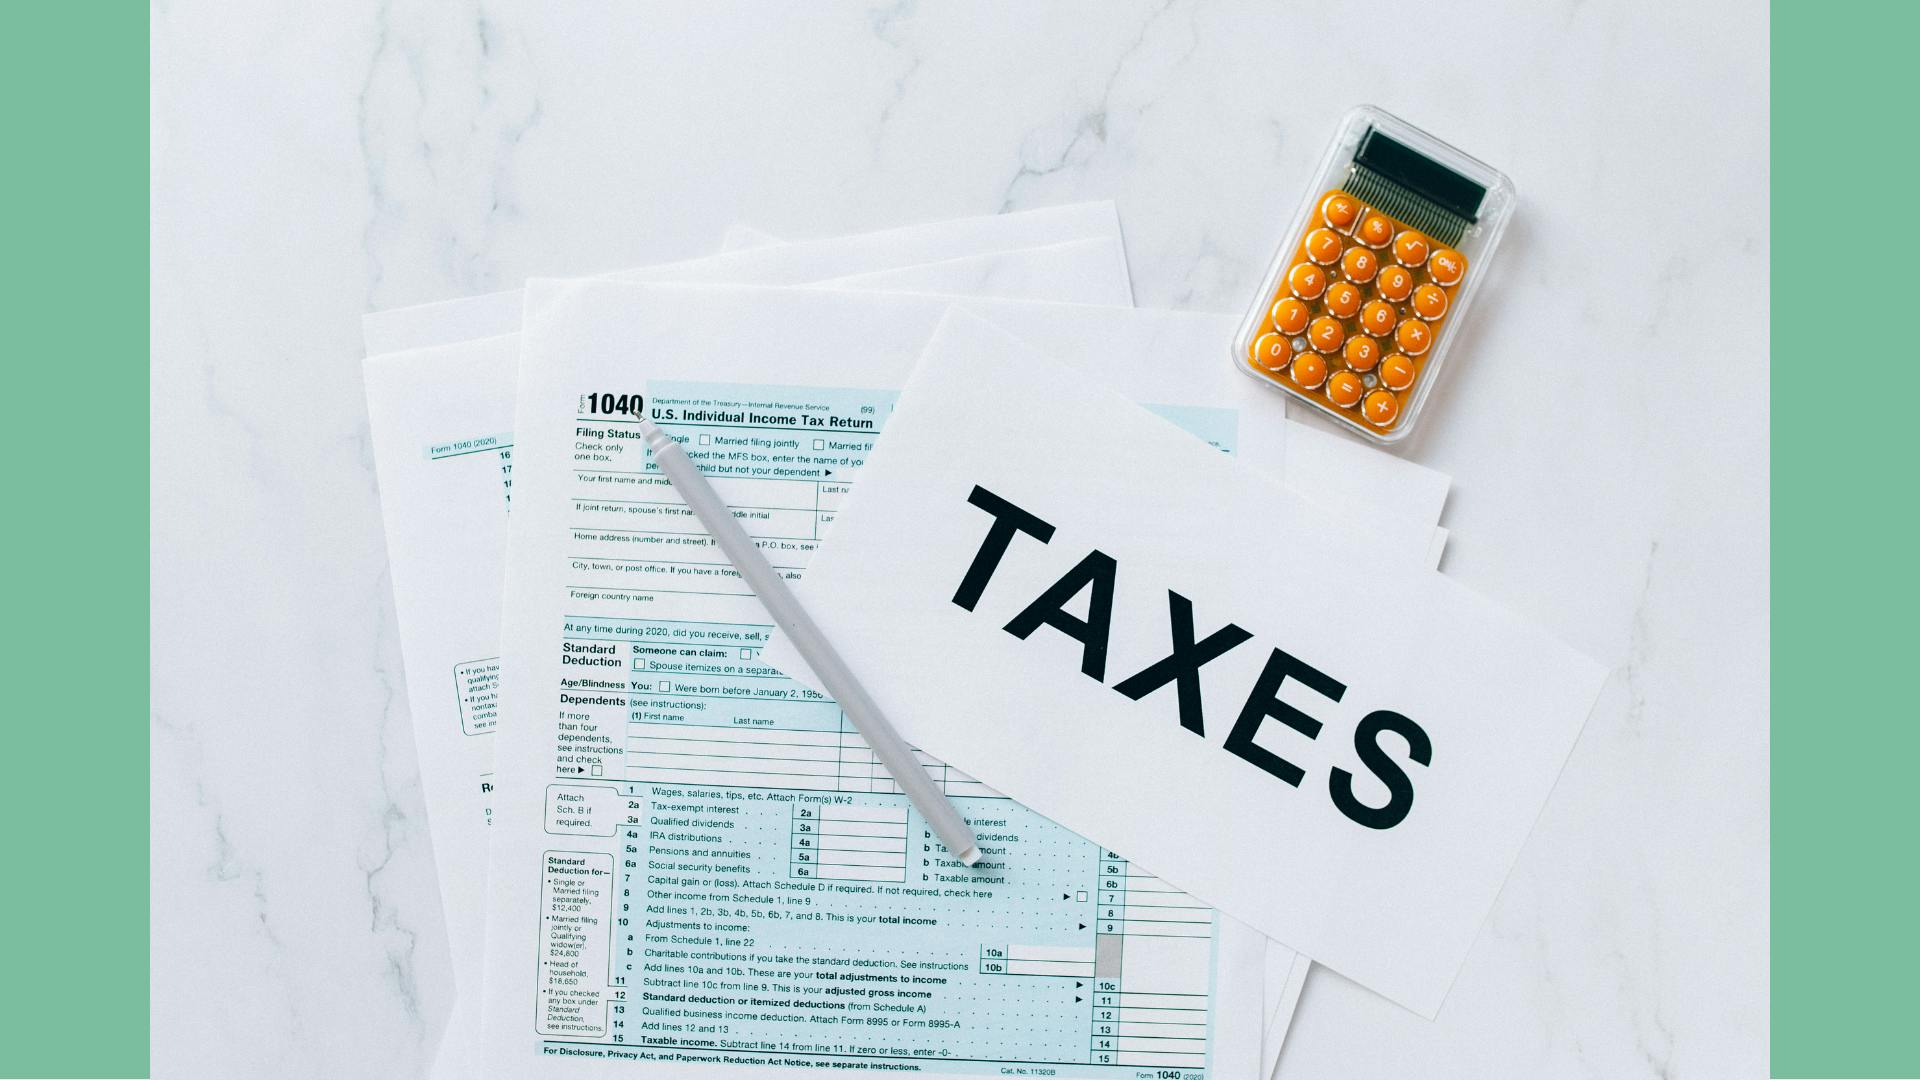 A flatlay image of taxation paperwork and a calculator with a sign that reads "TAXES", depicting tax season for landlords